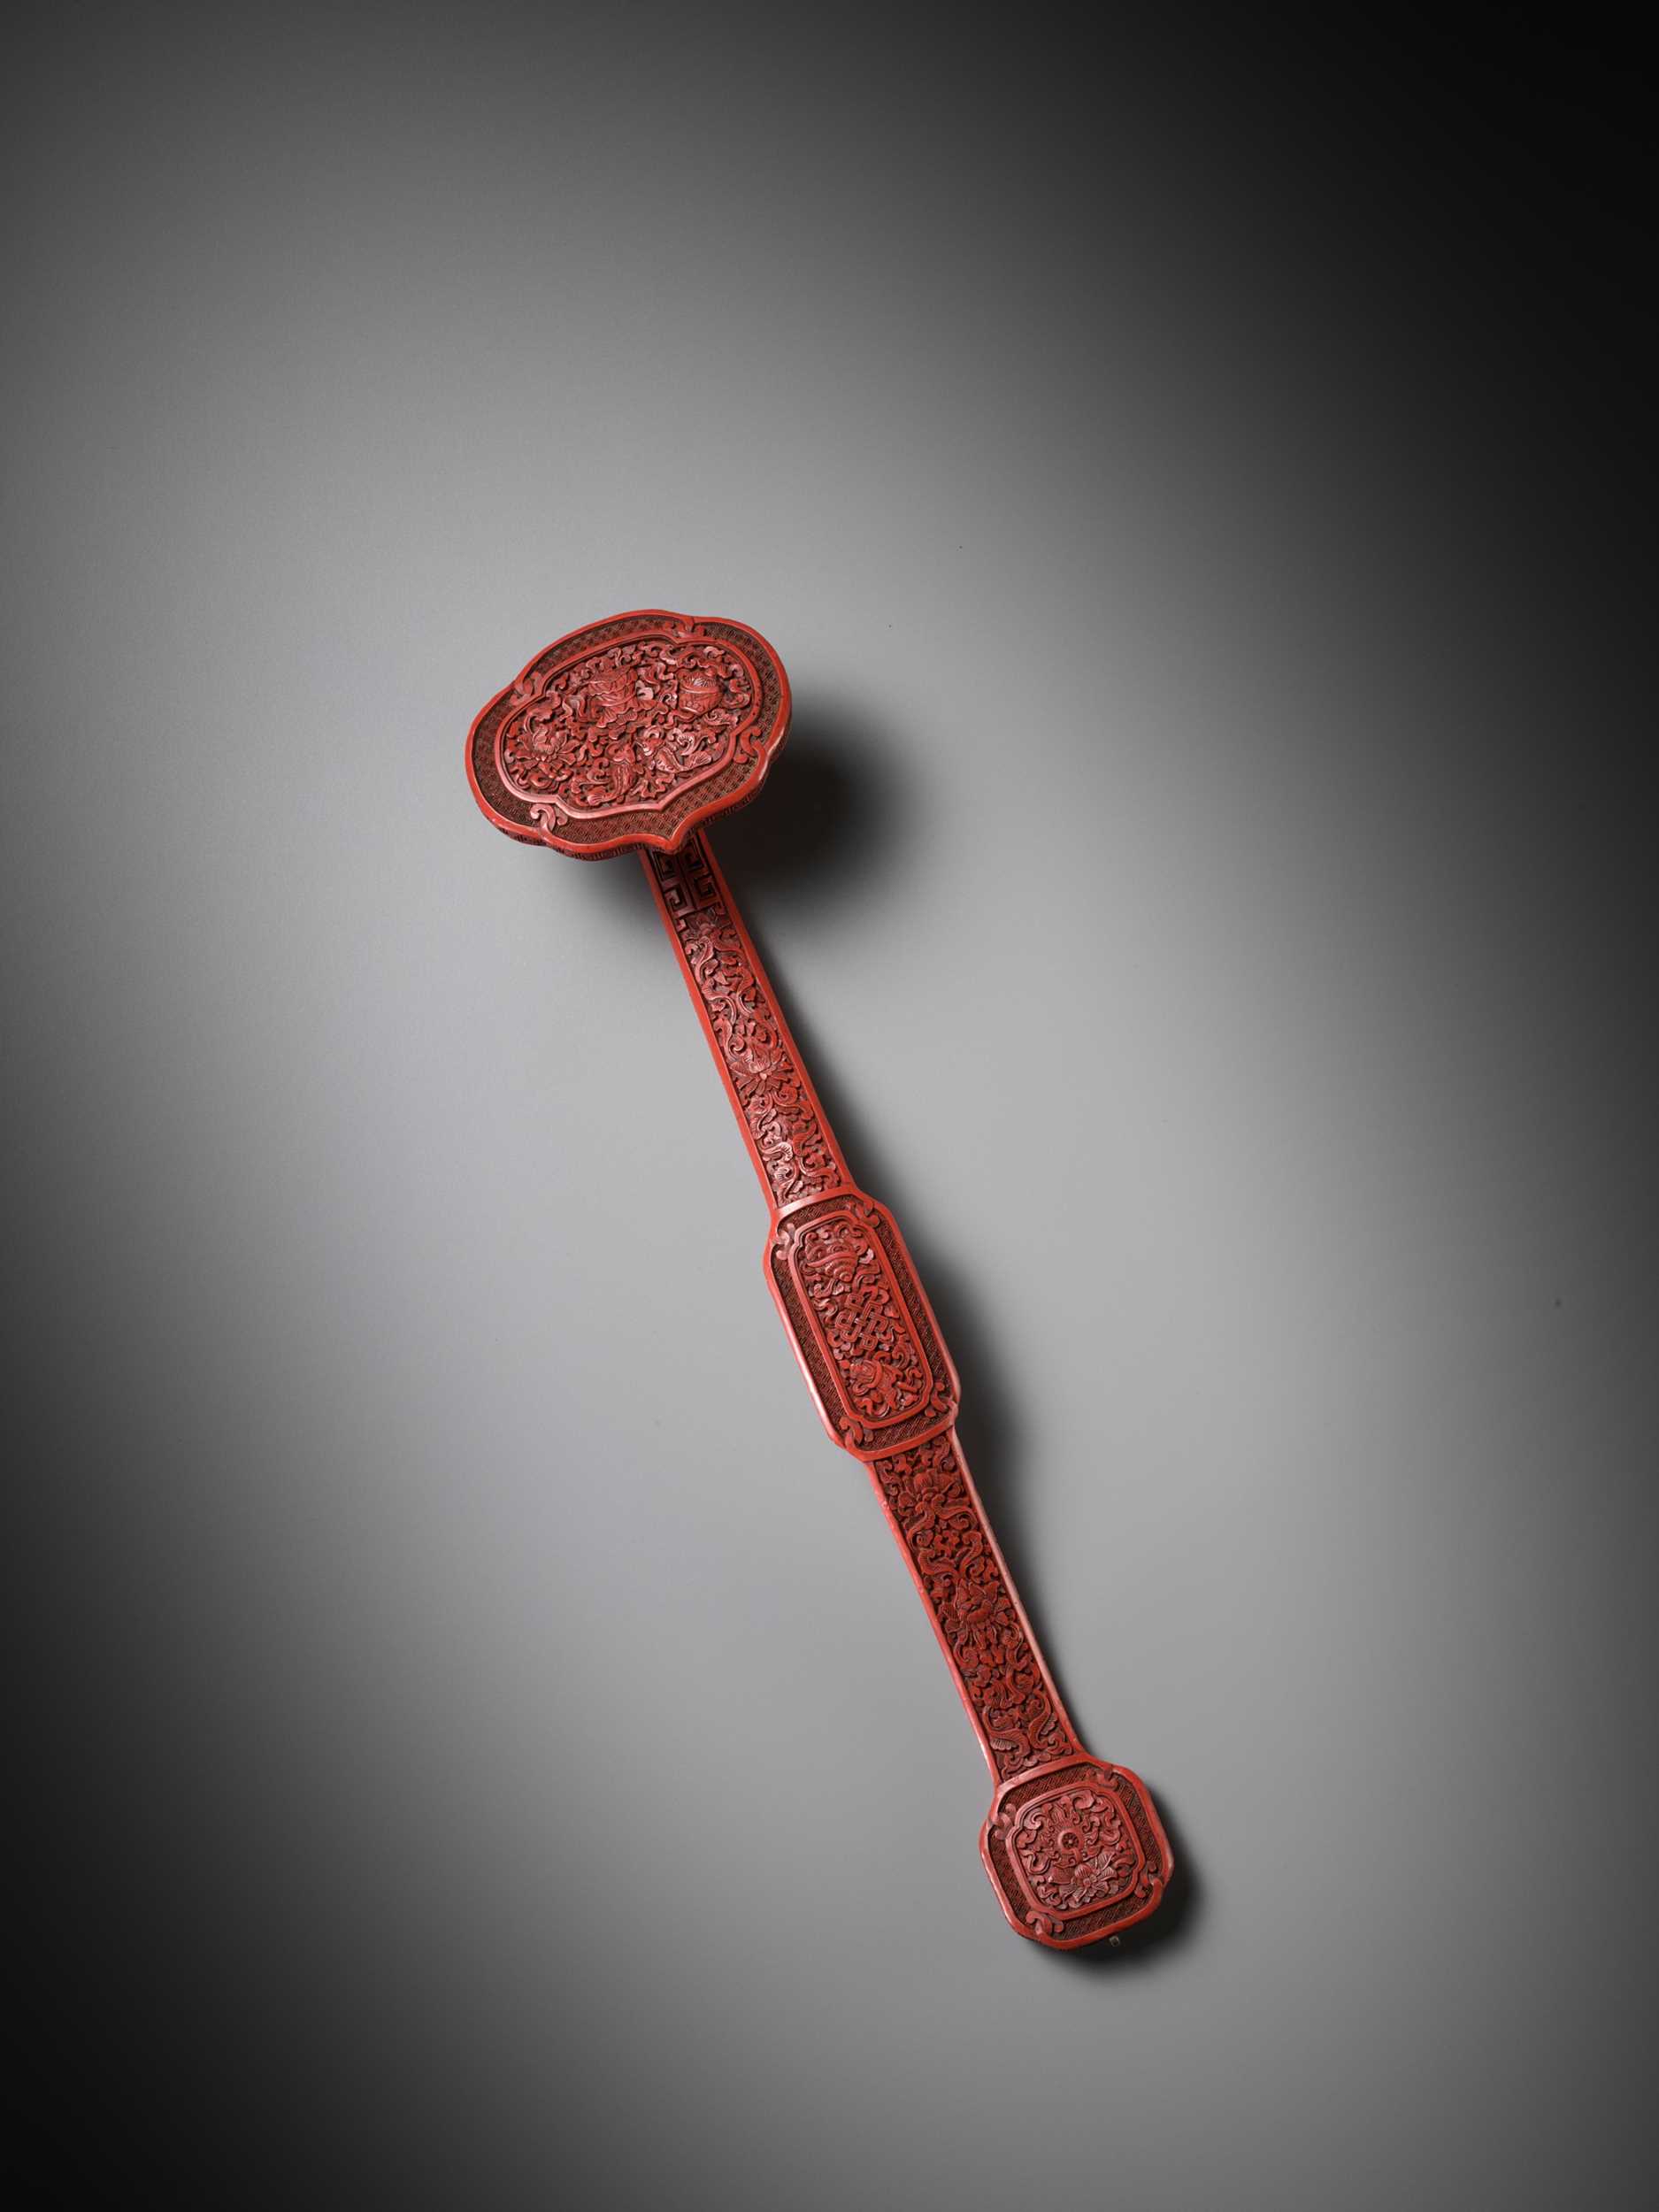 Lot 11 - A CARVED CINNABAR LACQUER ‘BAJIXIANG’ RUYI SCEPTER, QING DYNASTY